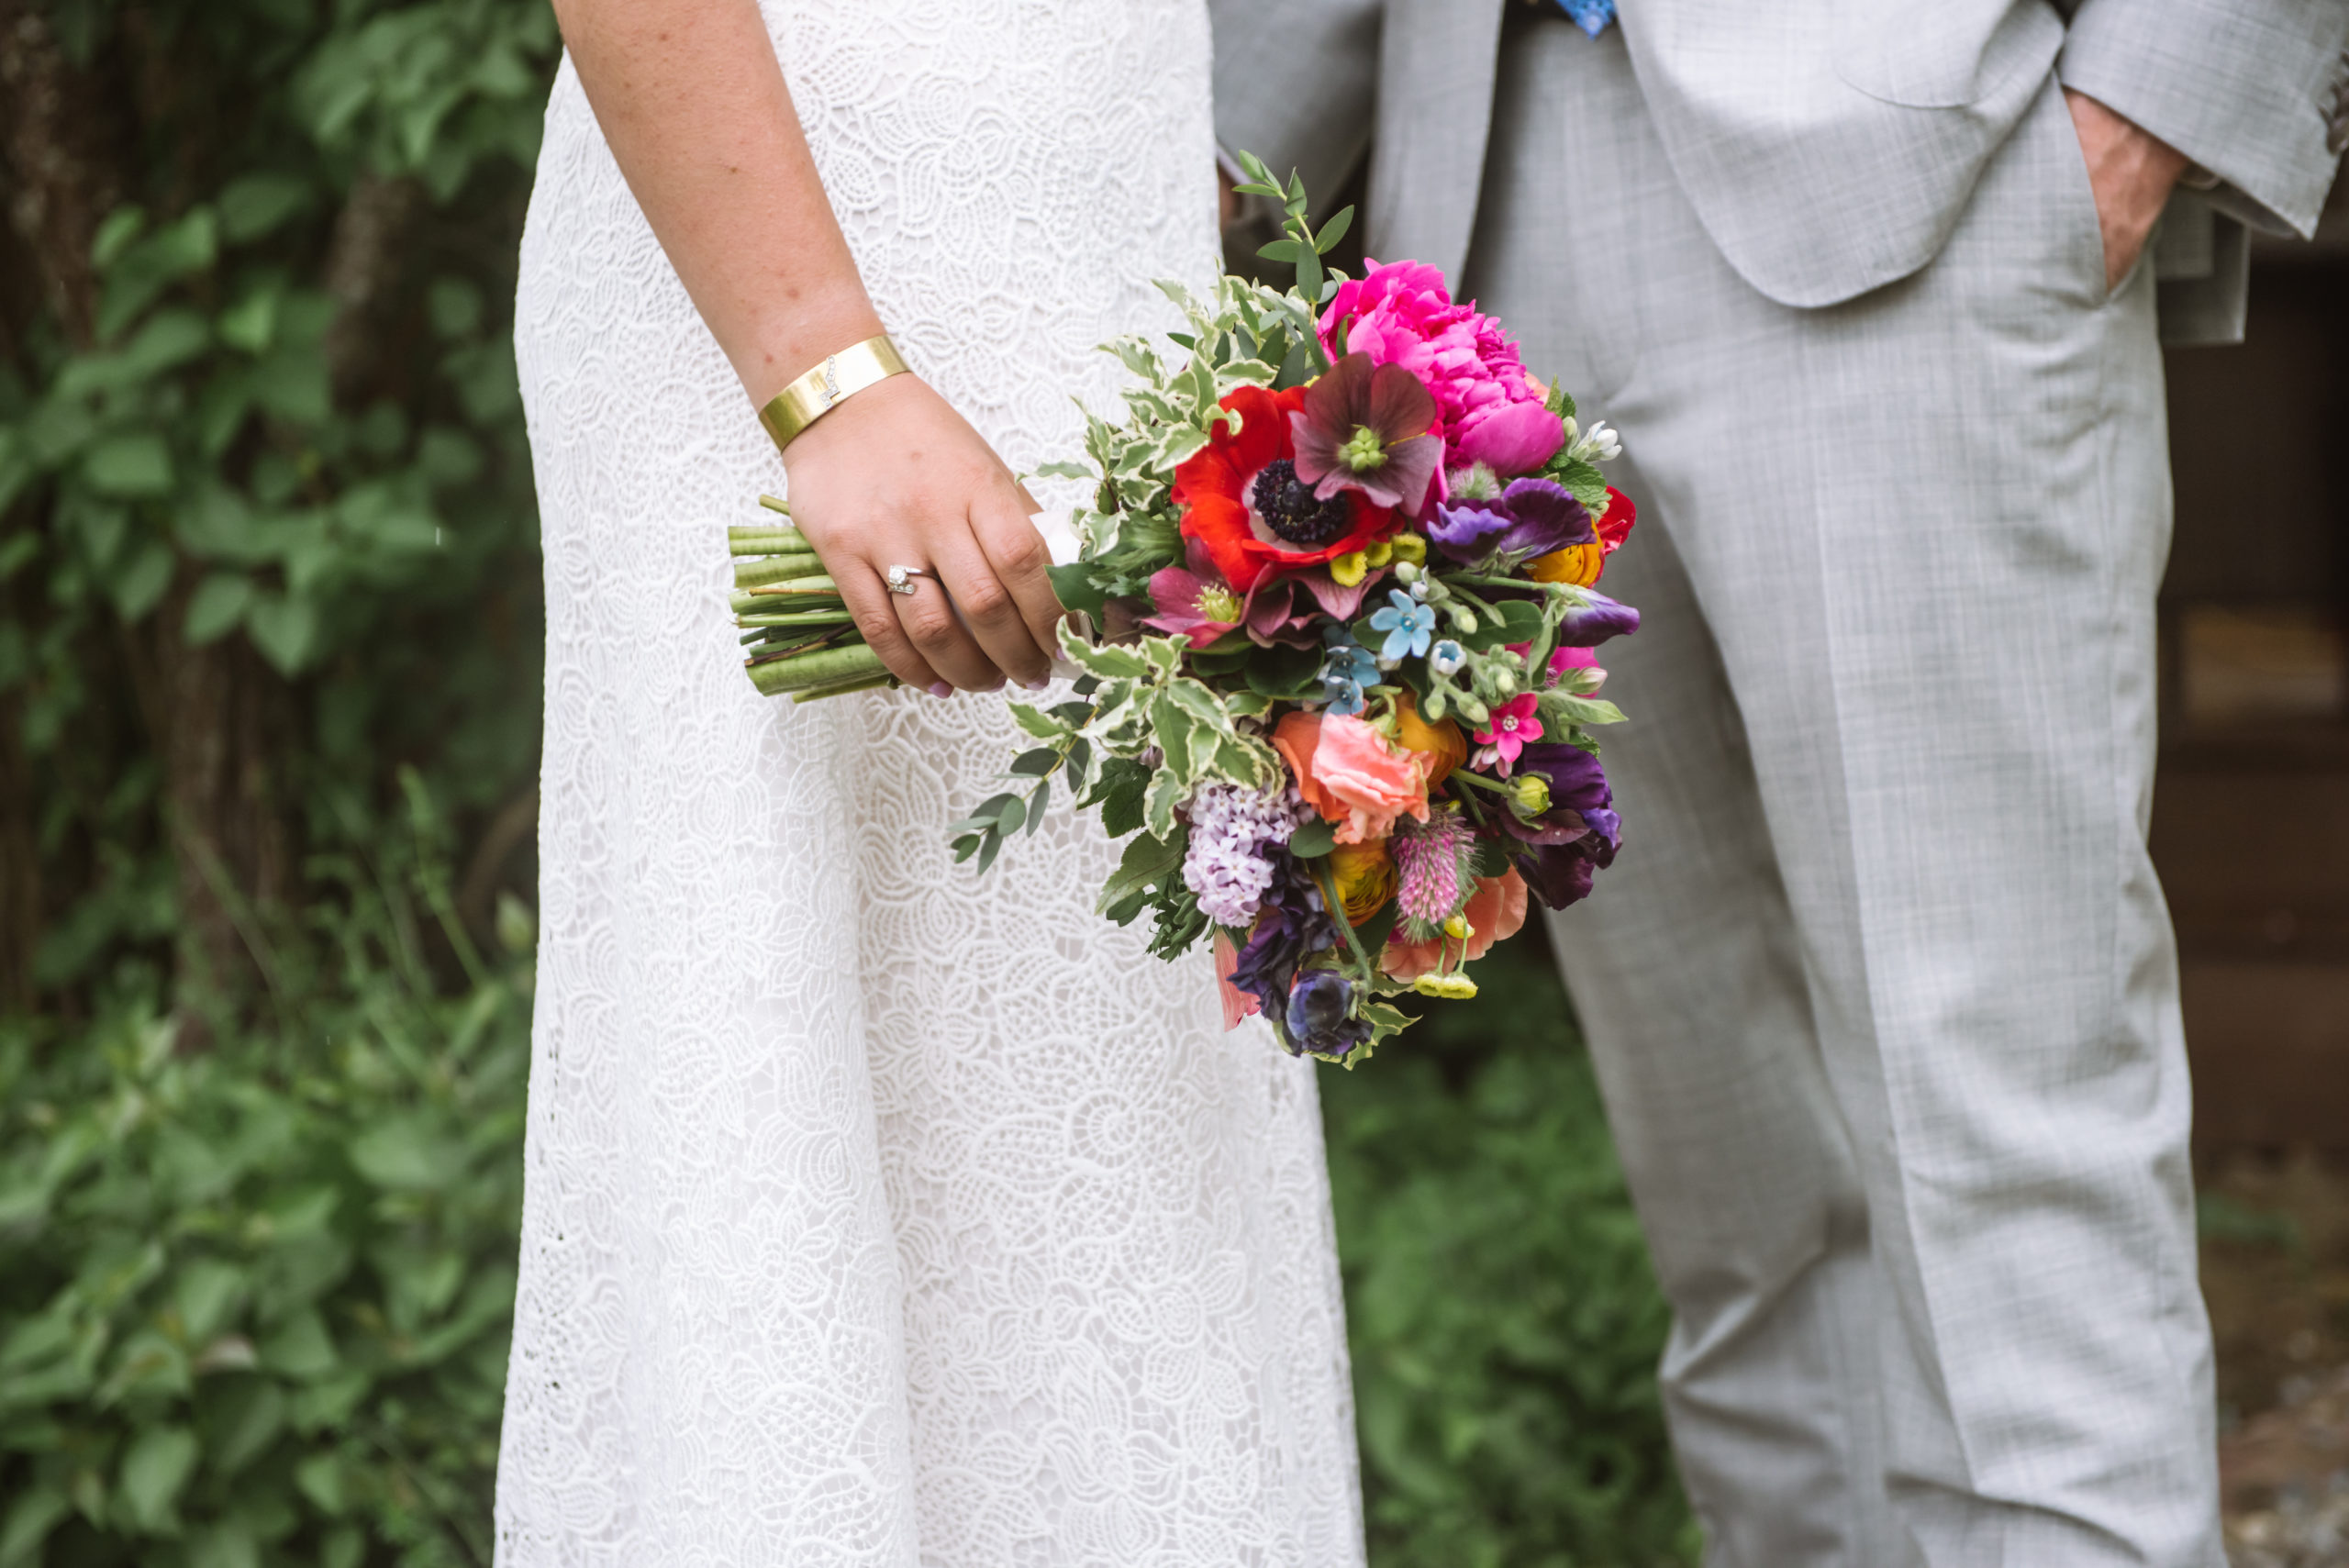 Close up photo of the bride's bouquet in her right hand. She is wearing her engagement ring (a family heirloom) on her ring finger and is wearing a bracelet. Bride and groom standing facing one another. The bride is holding her multi-colored bouquet in her right hand and the groom's left hand is in his pocket.